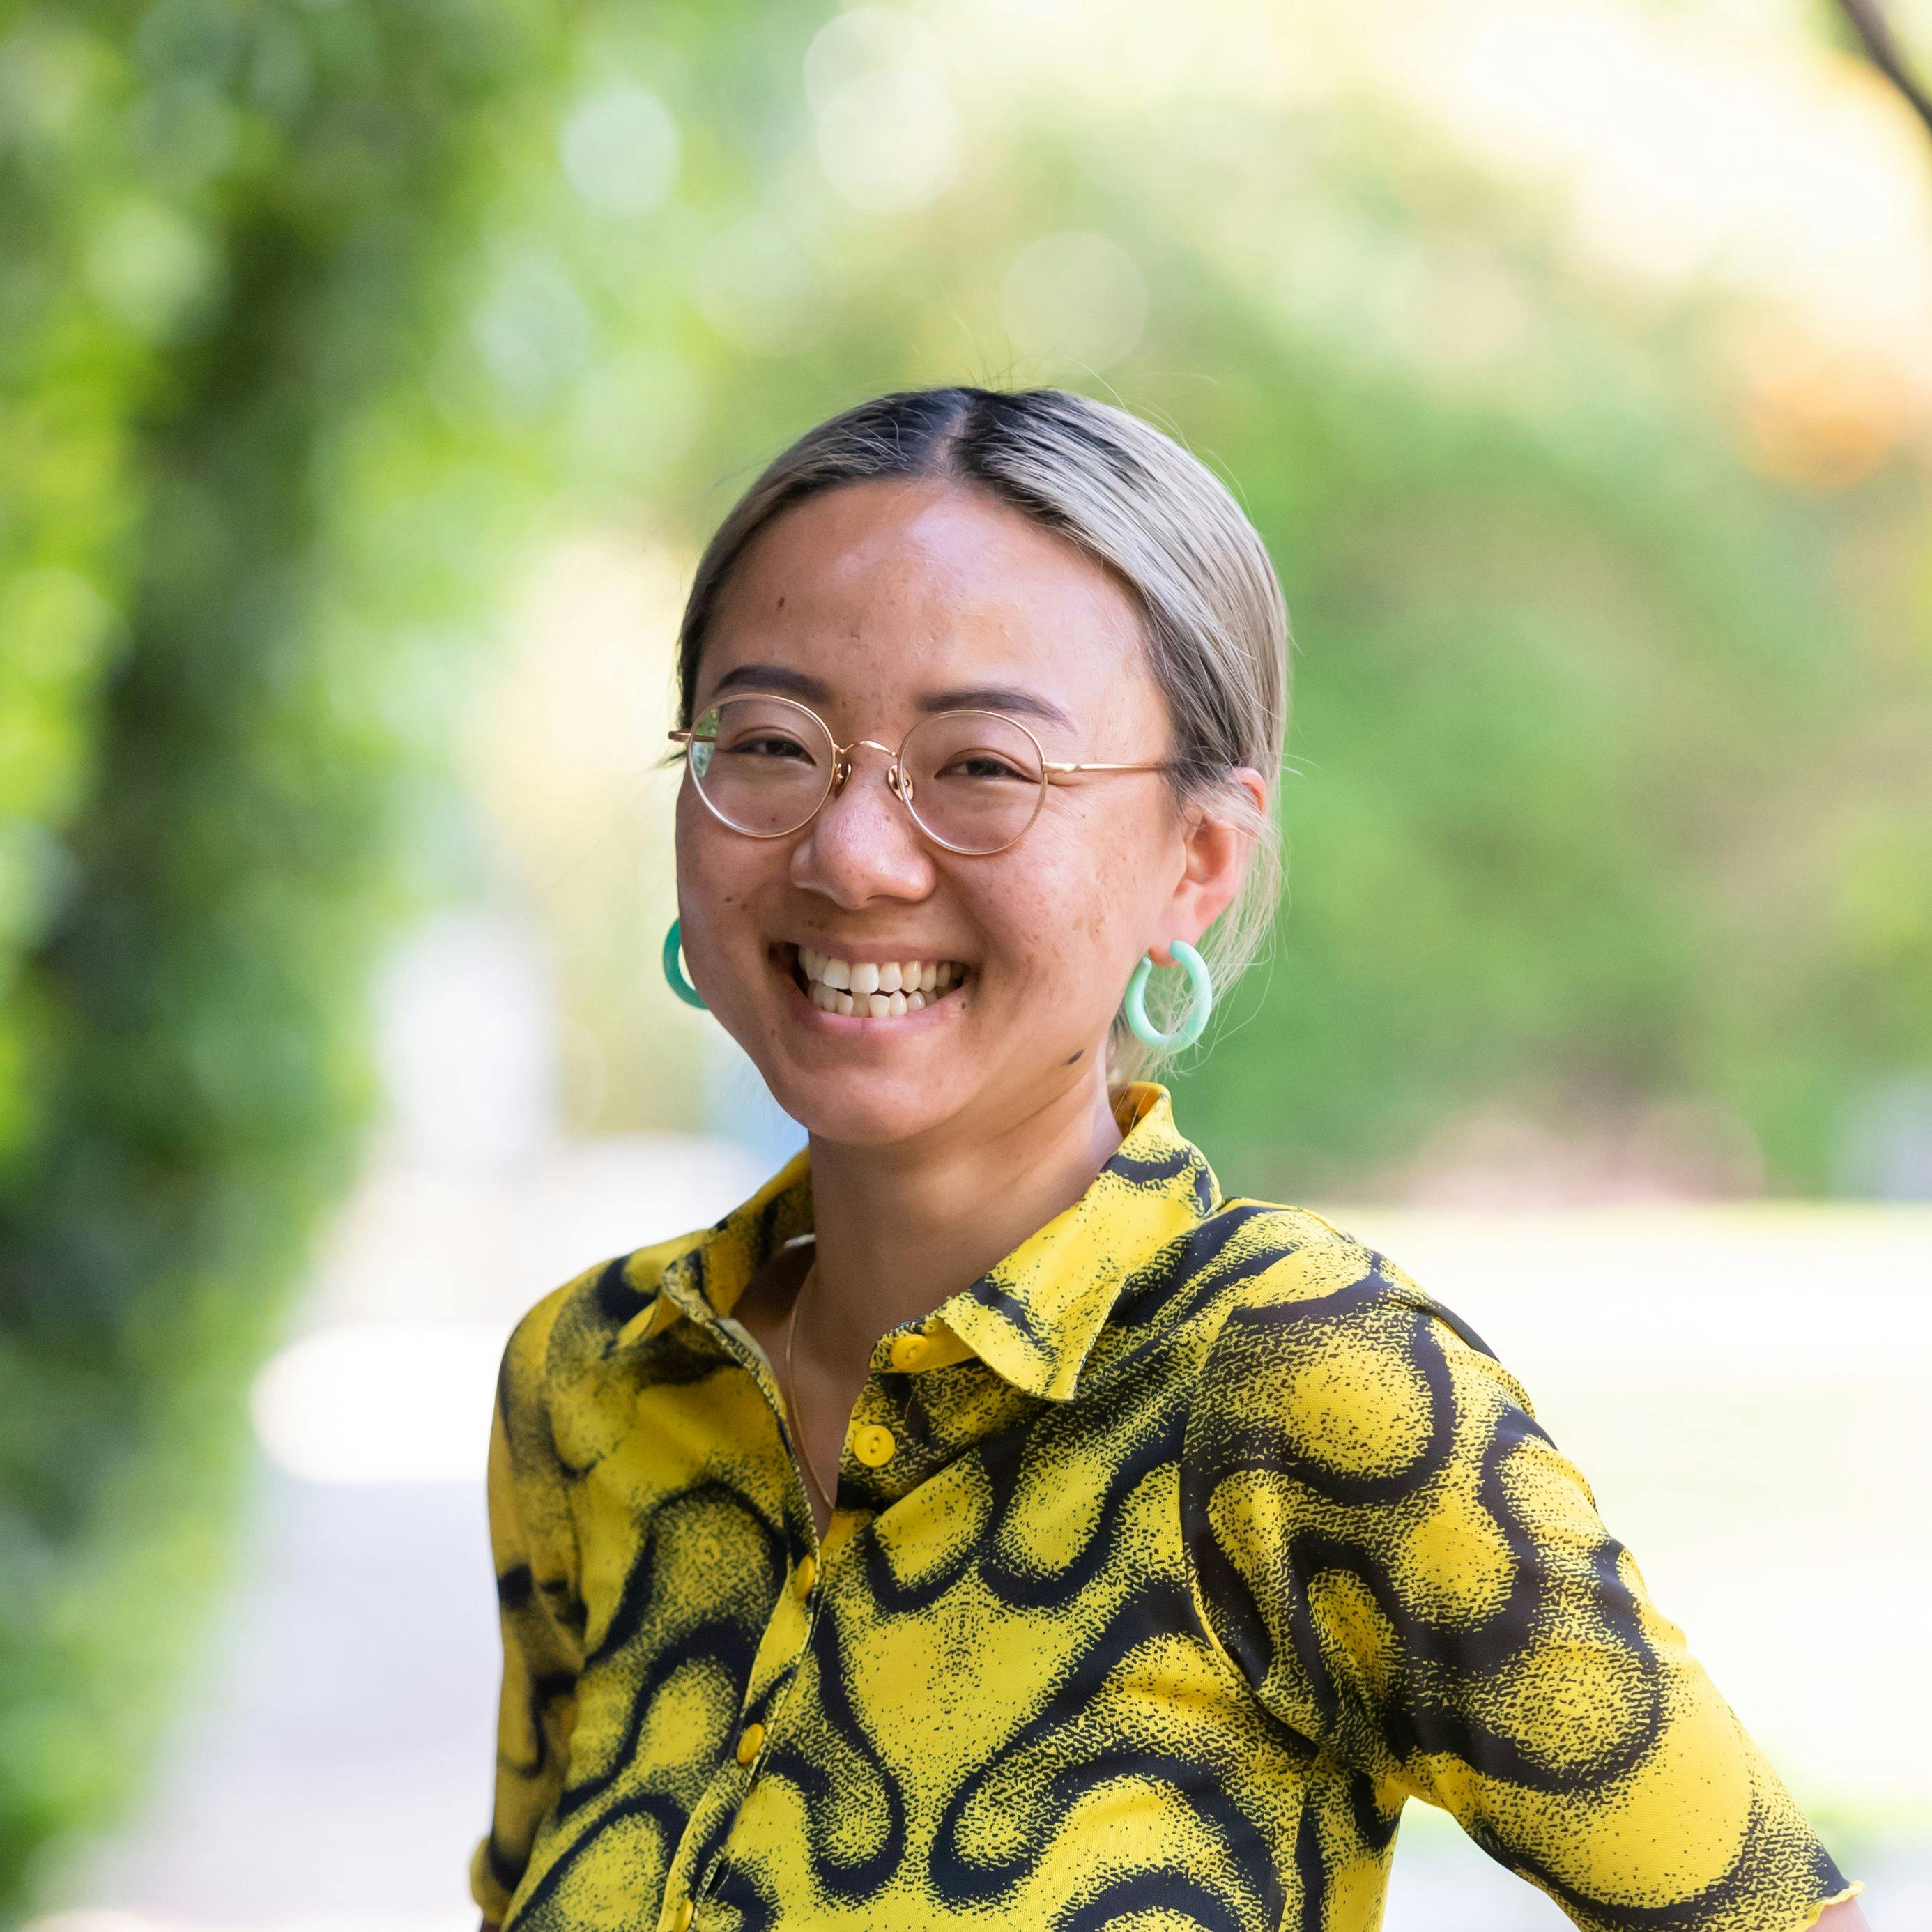 An Asian non-binary person wearing green hoop earrings and a bright yellow shirt with squiggly black lines and dots smiles brightly.